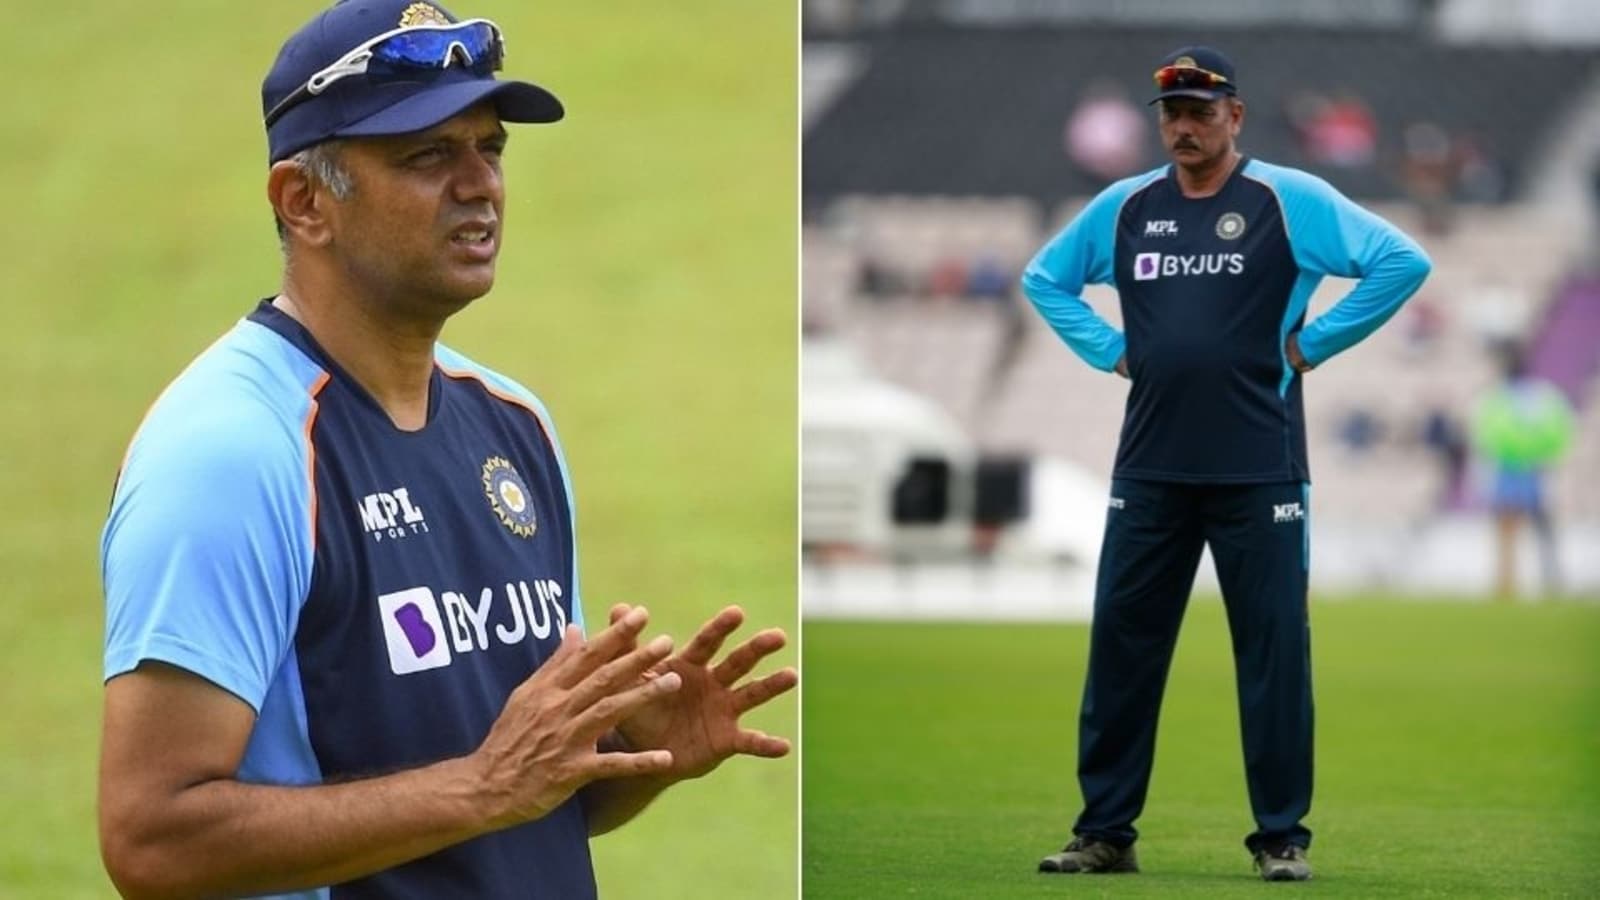 Hindi News: ‘If you stick with the same, adjustments will be difficult’: Shastri’s advice for Dravid amid IND’s ‘transition period’